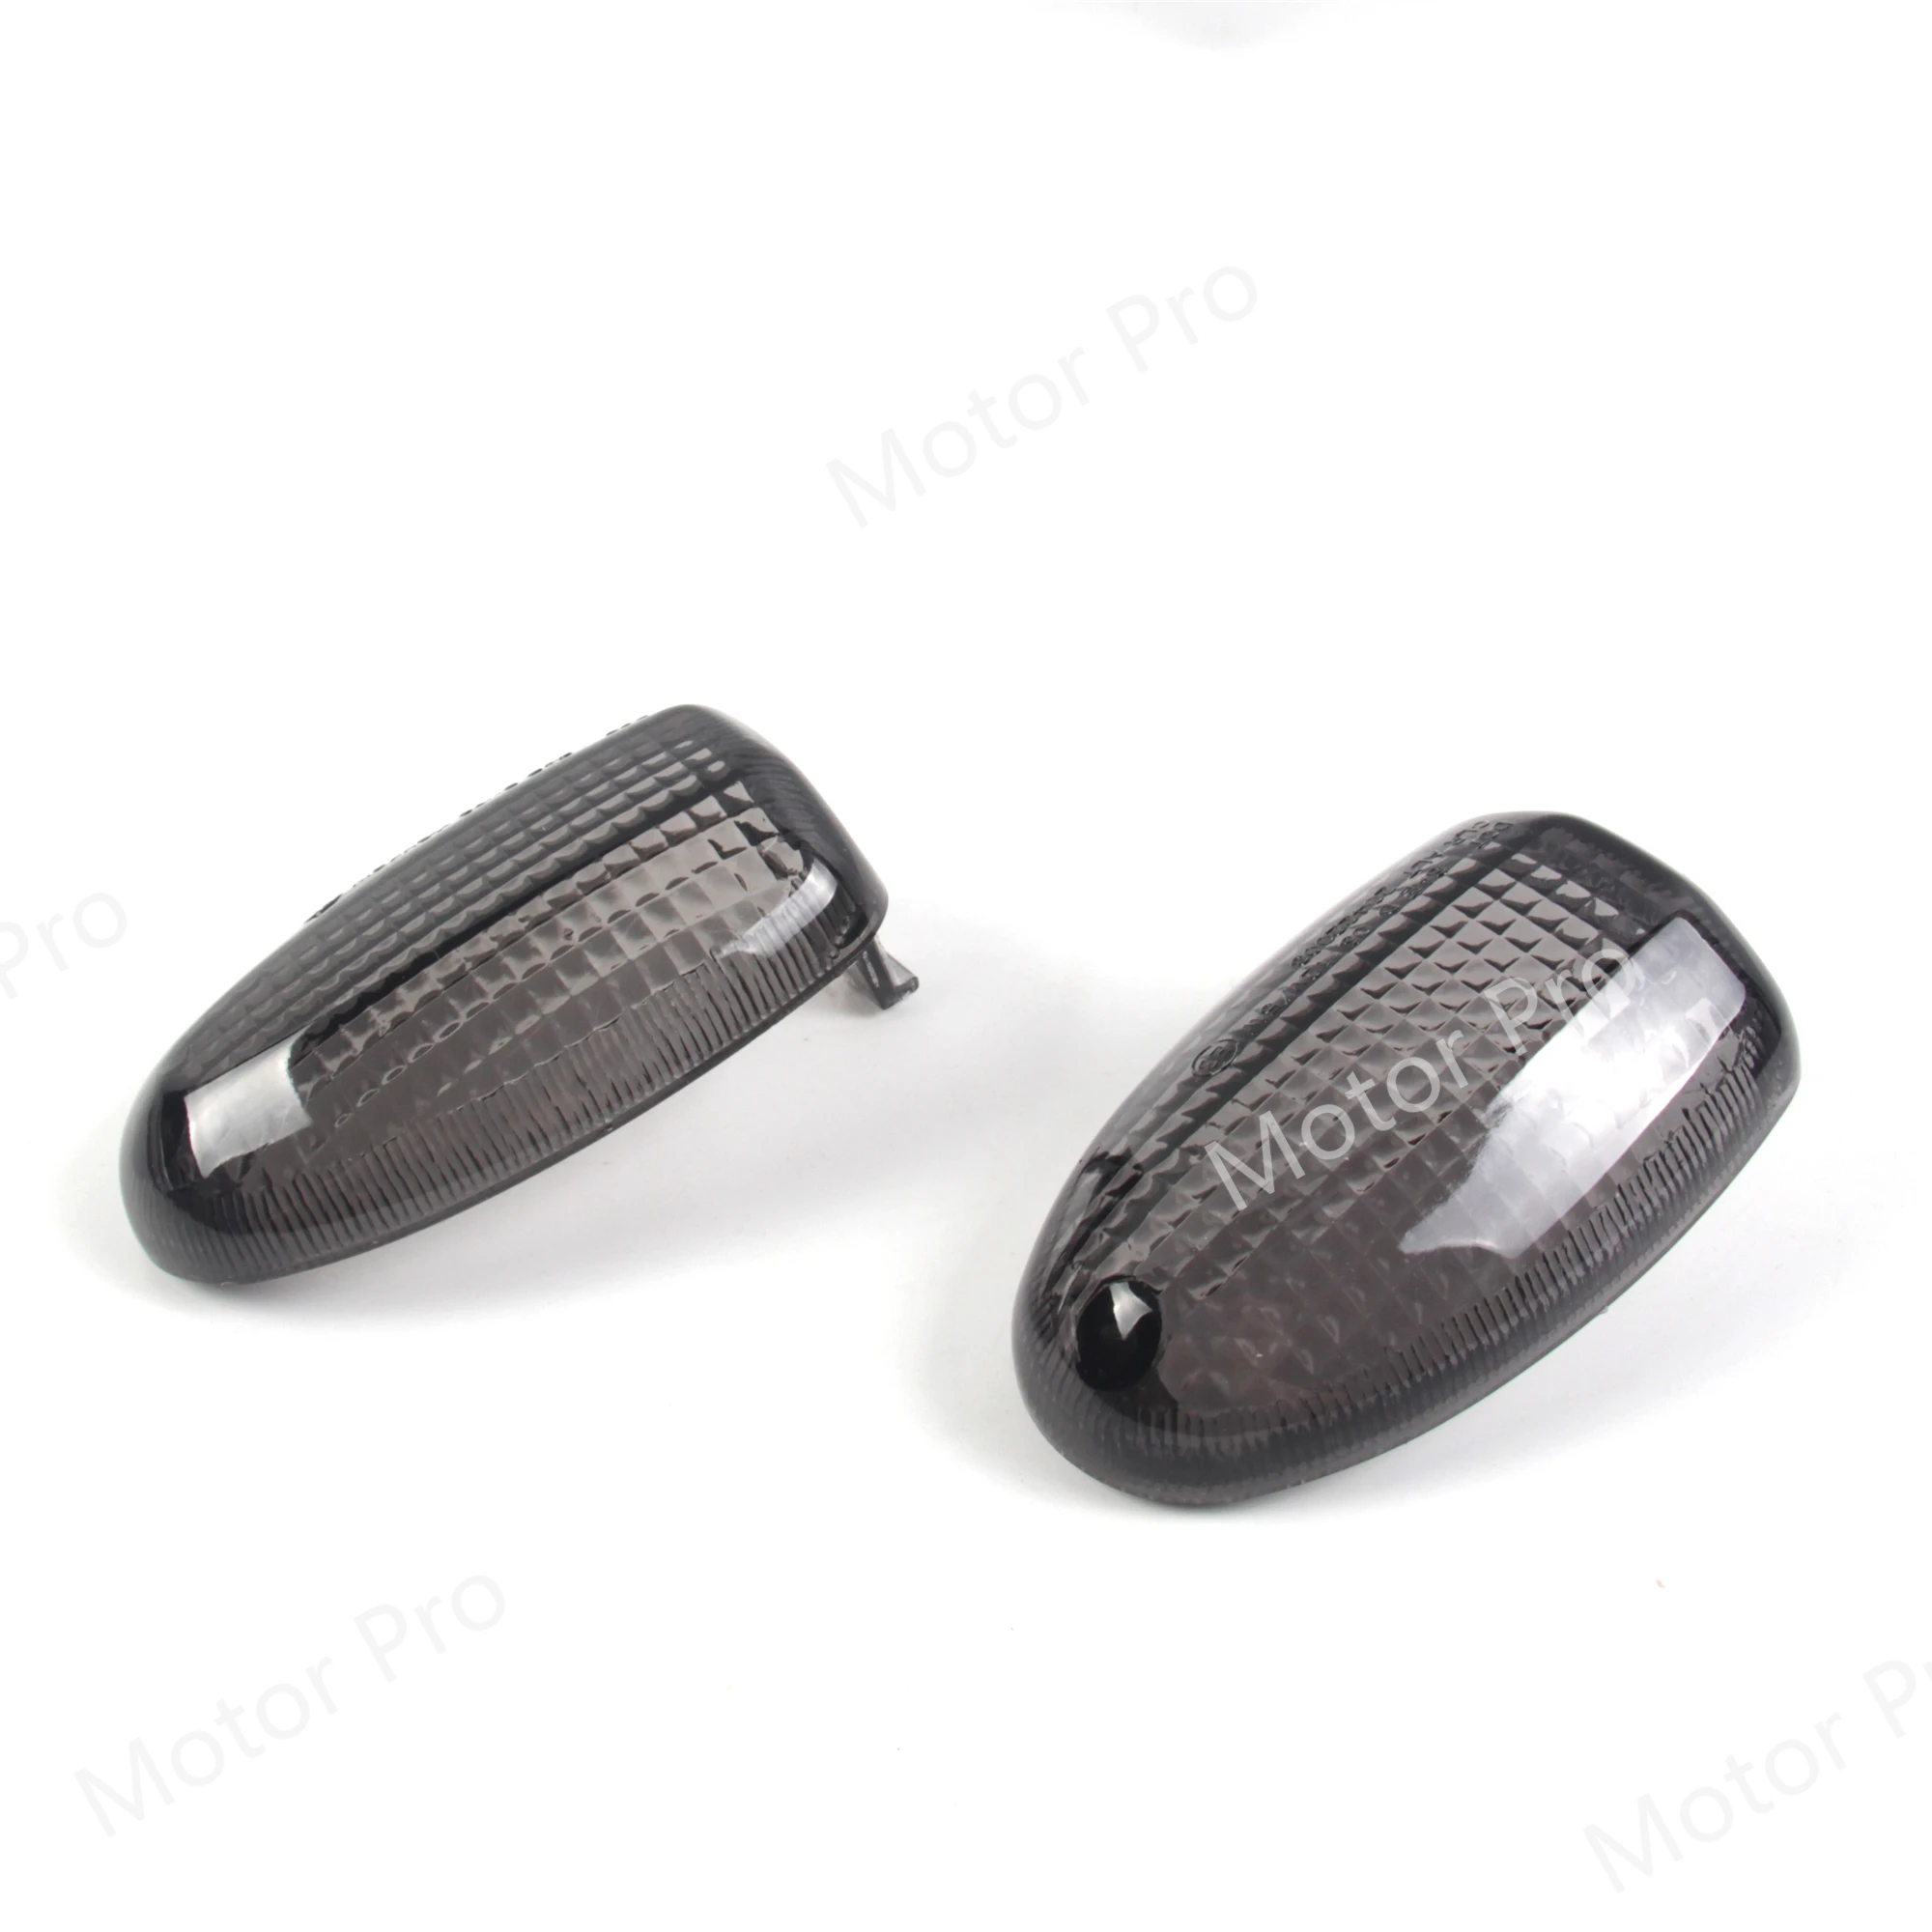 2PCS Light Covers Turn Signal Light Indicator Lens For BMW R1100R R850R R1150GS R1150R Motorcycle Front Lamp R1100 R850 R1150 R